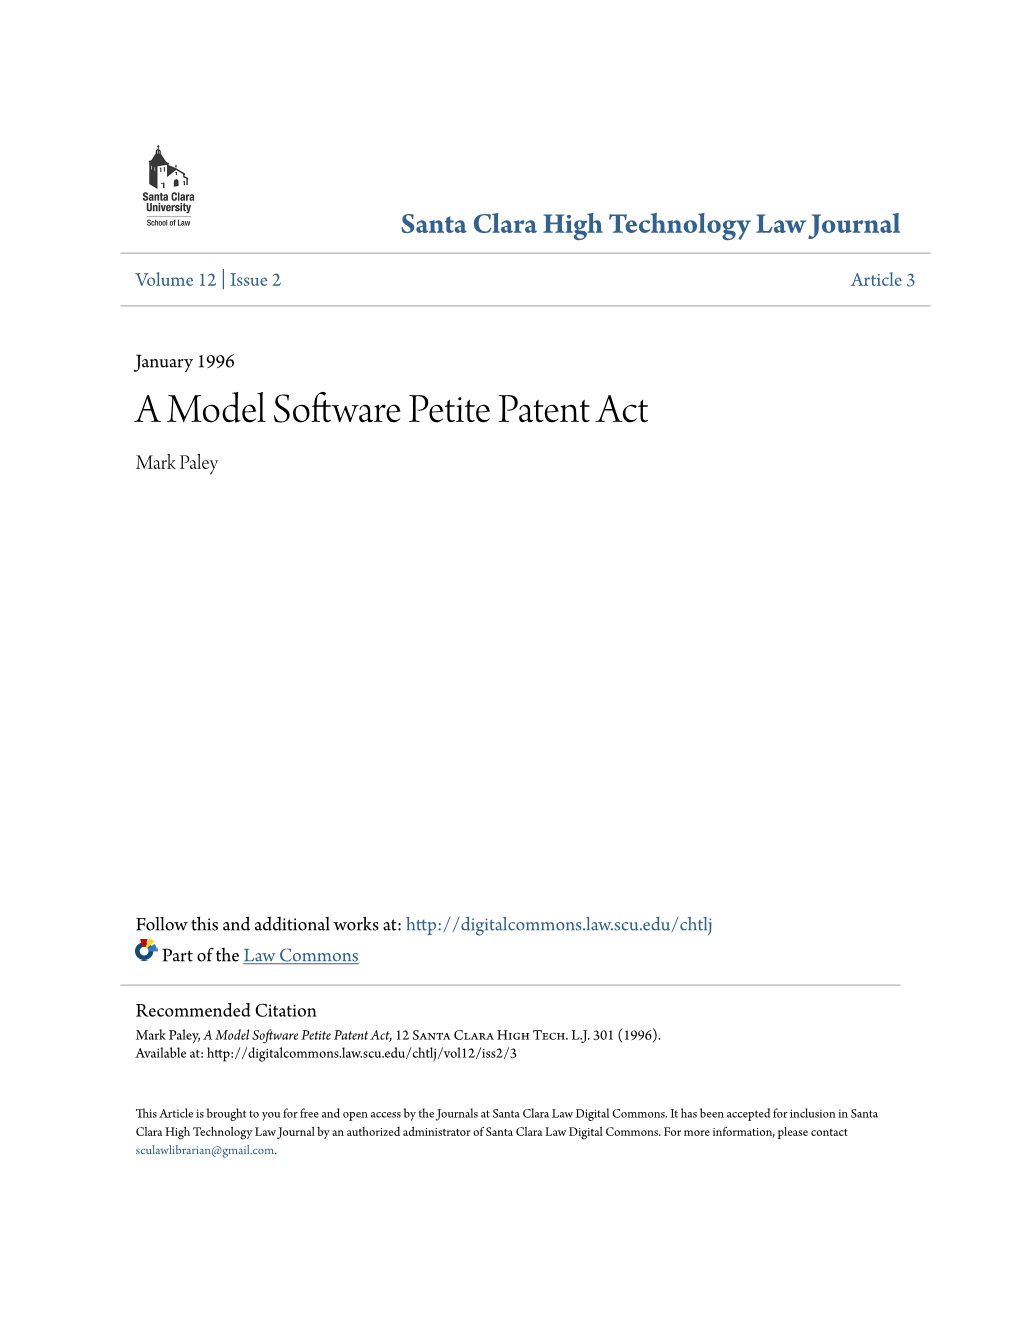 A Model Software Petite Patent Act Mark Paley